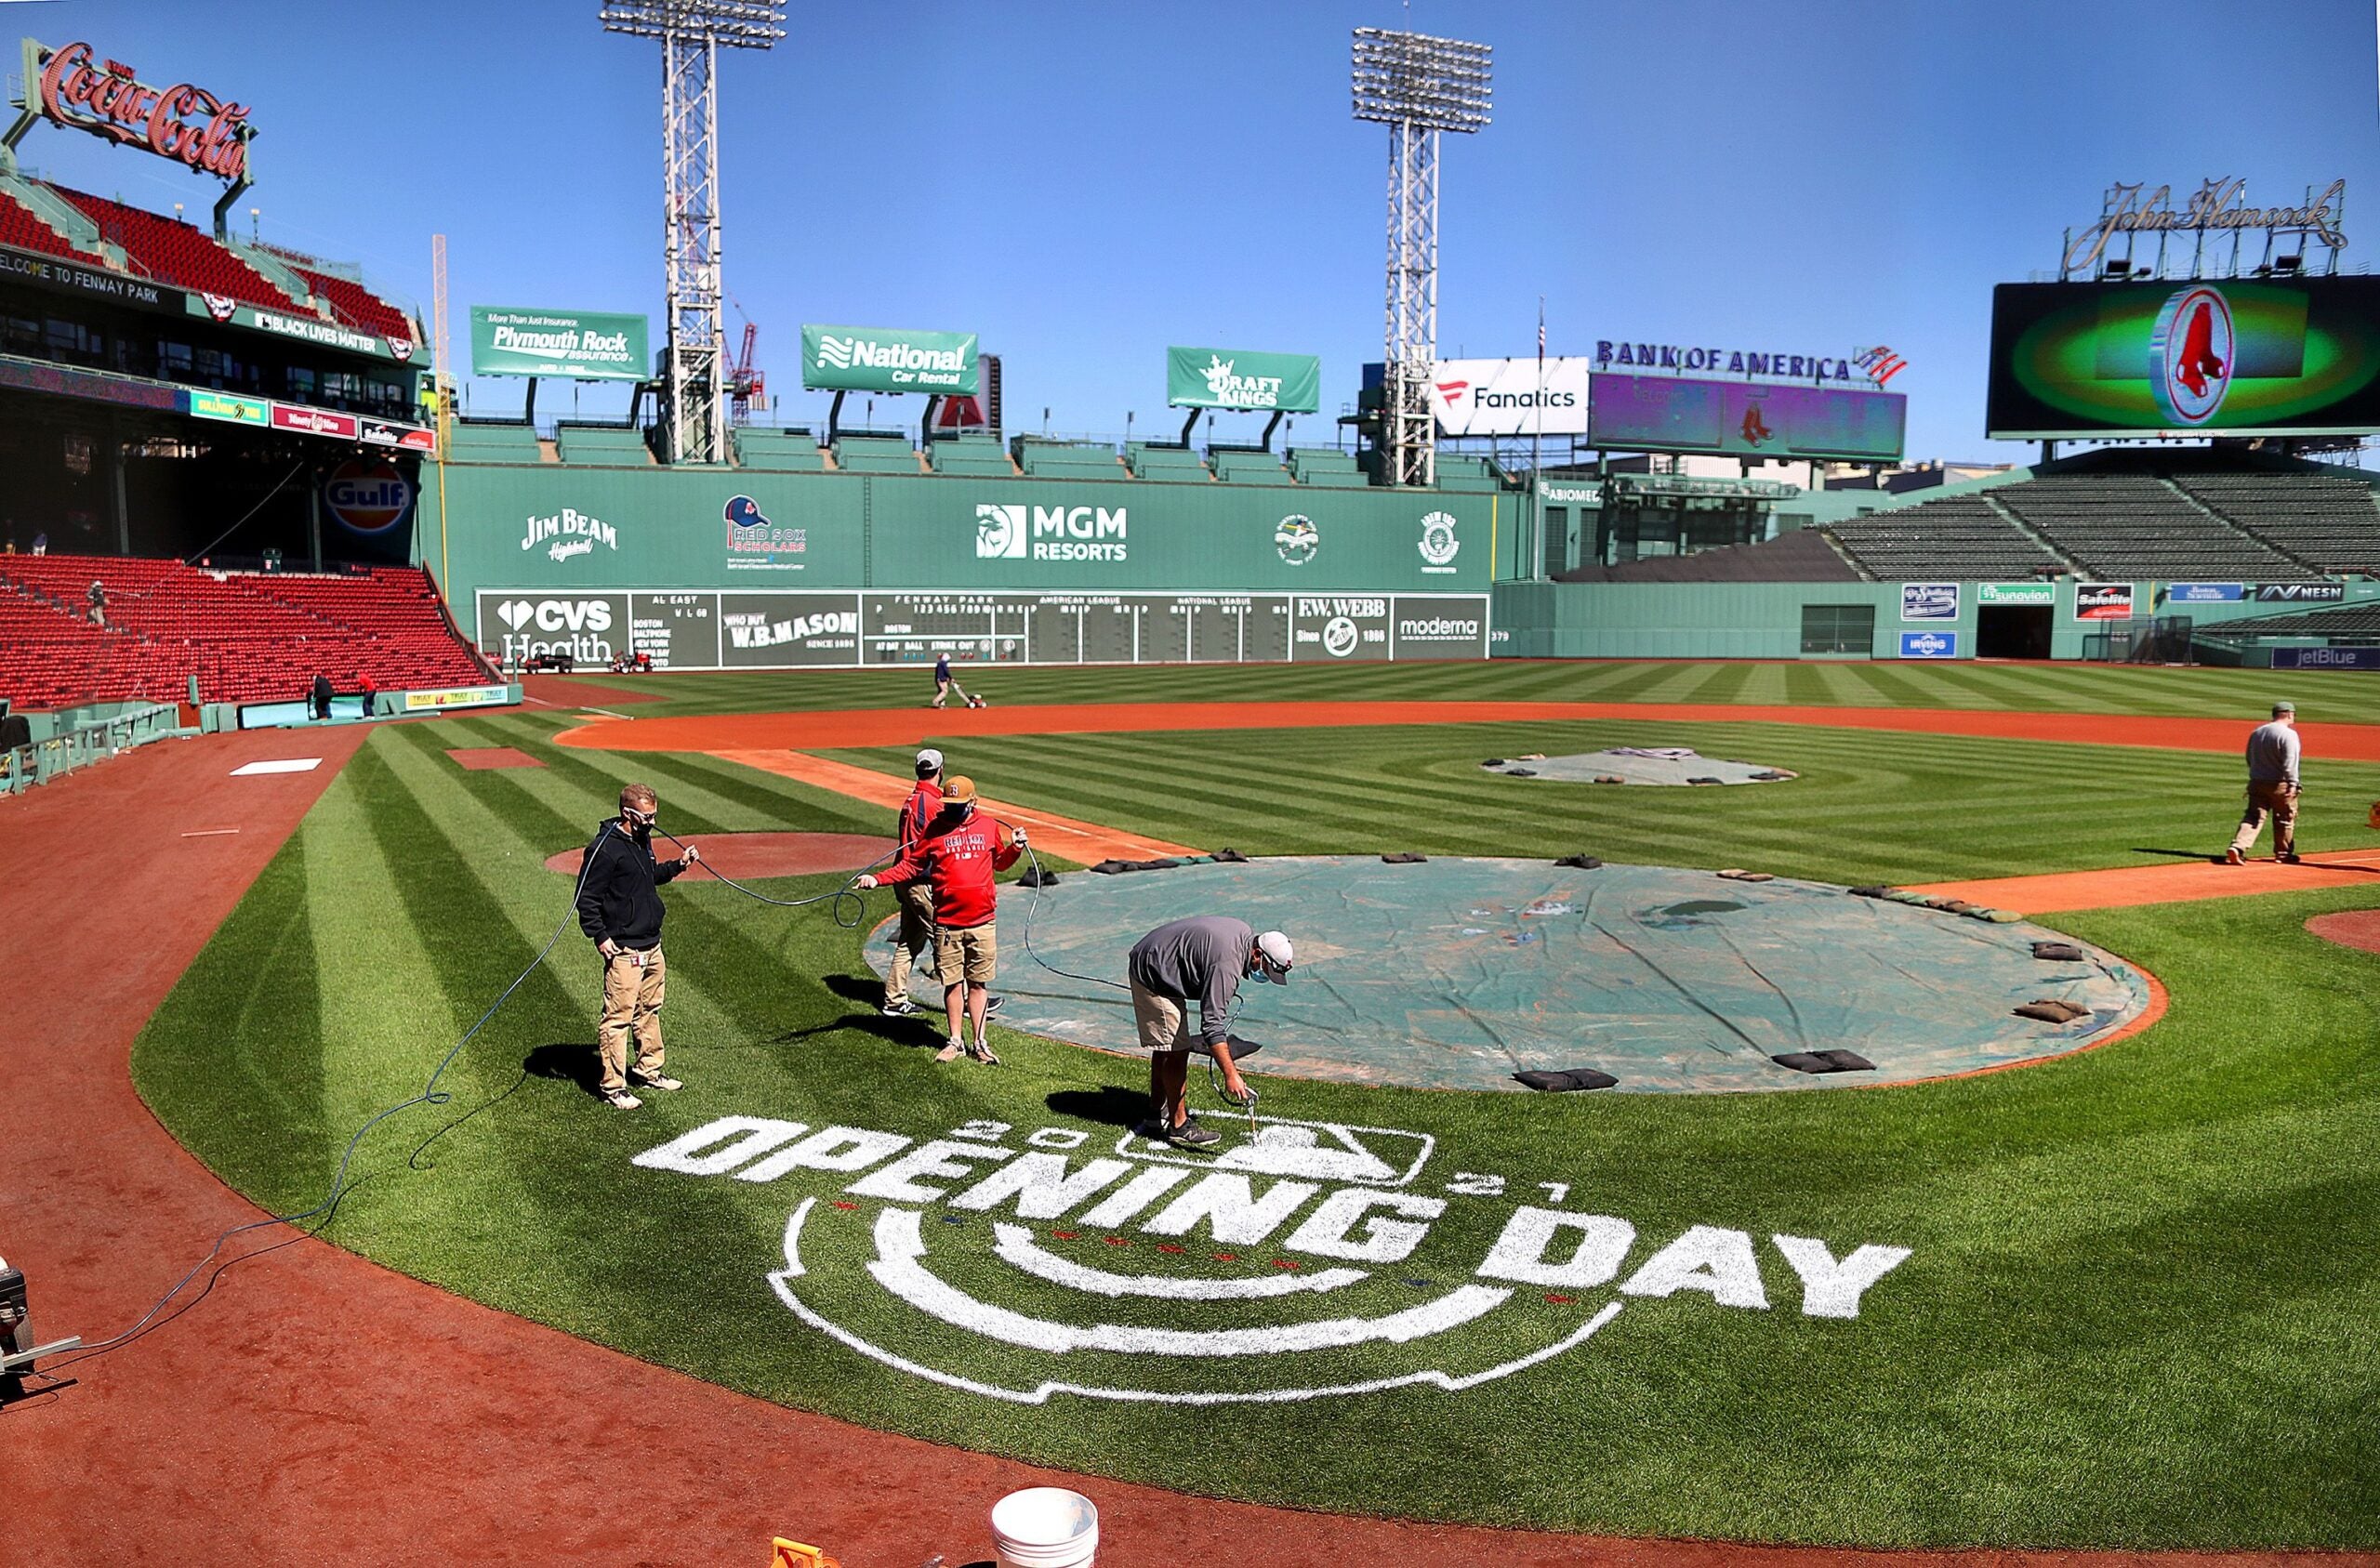 See the schedule for the Red Sox’ Opening Day ceremonies